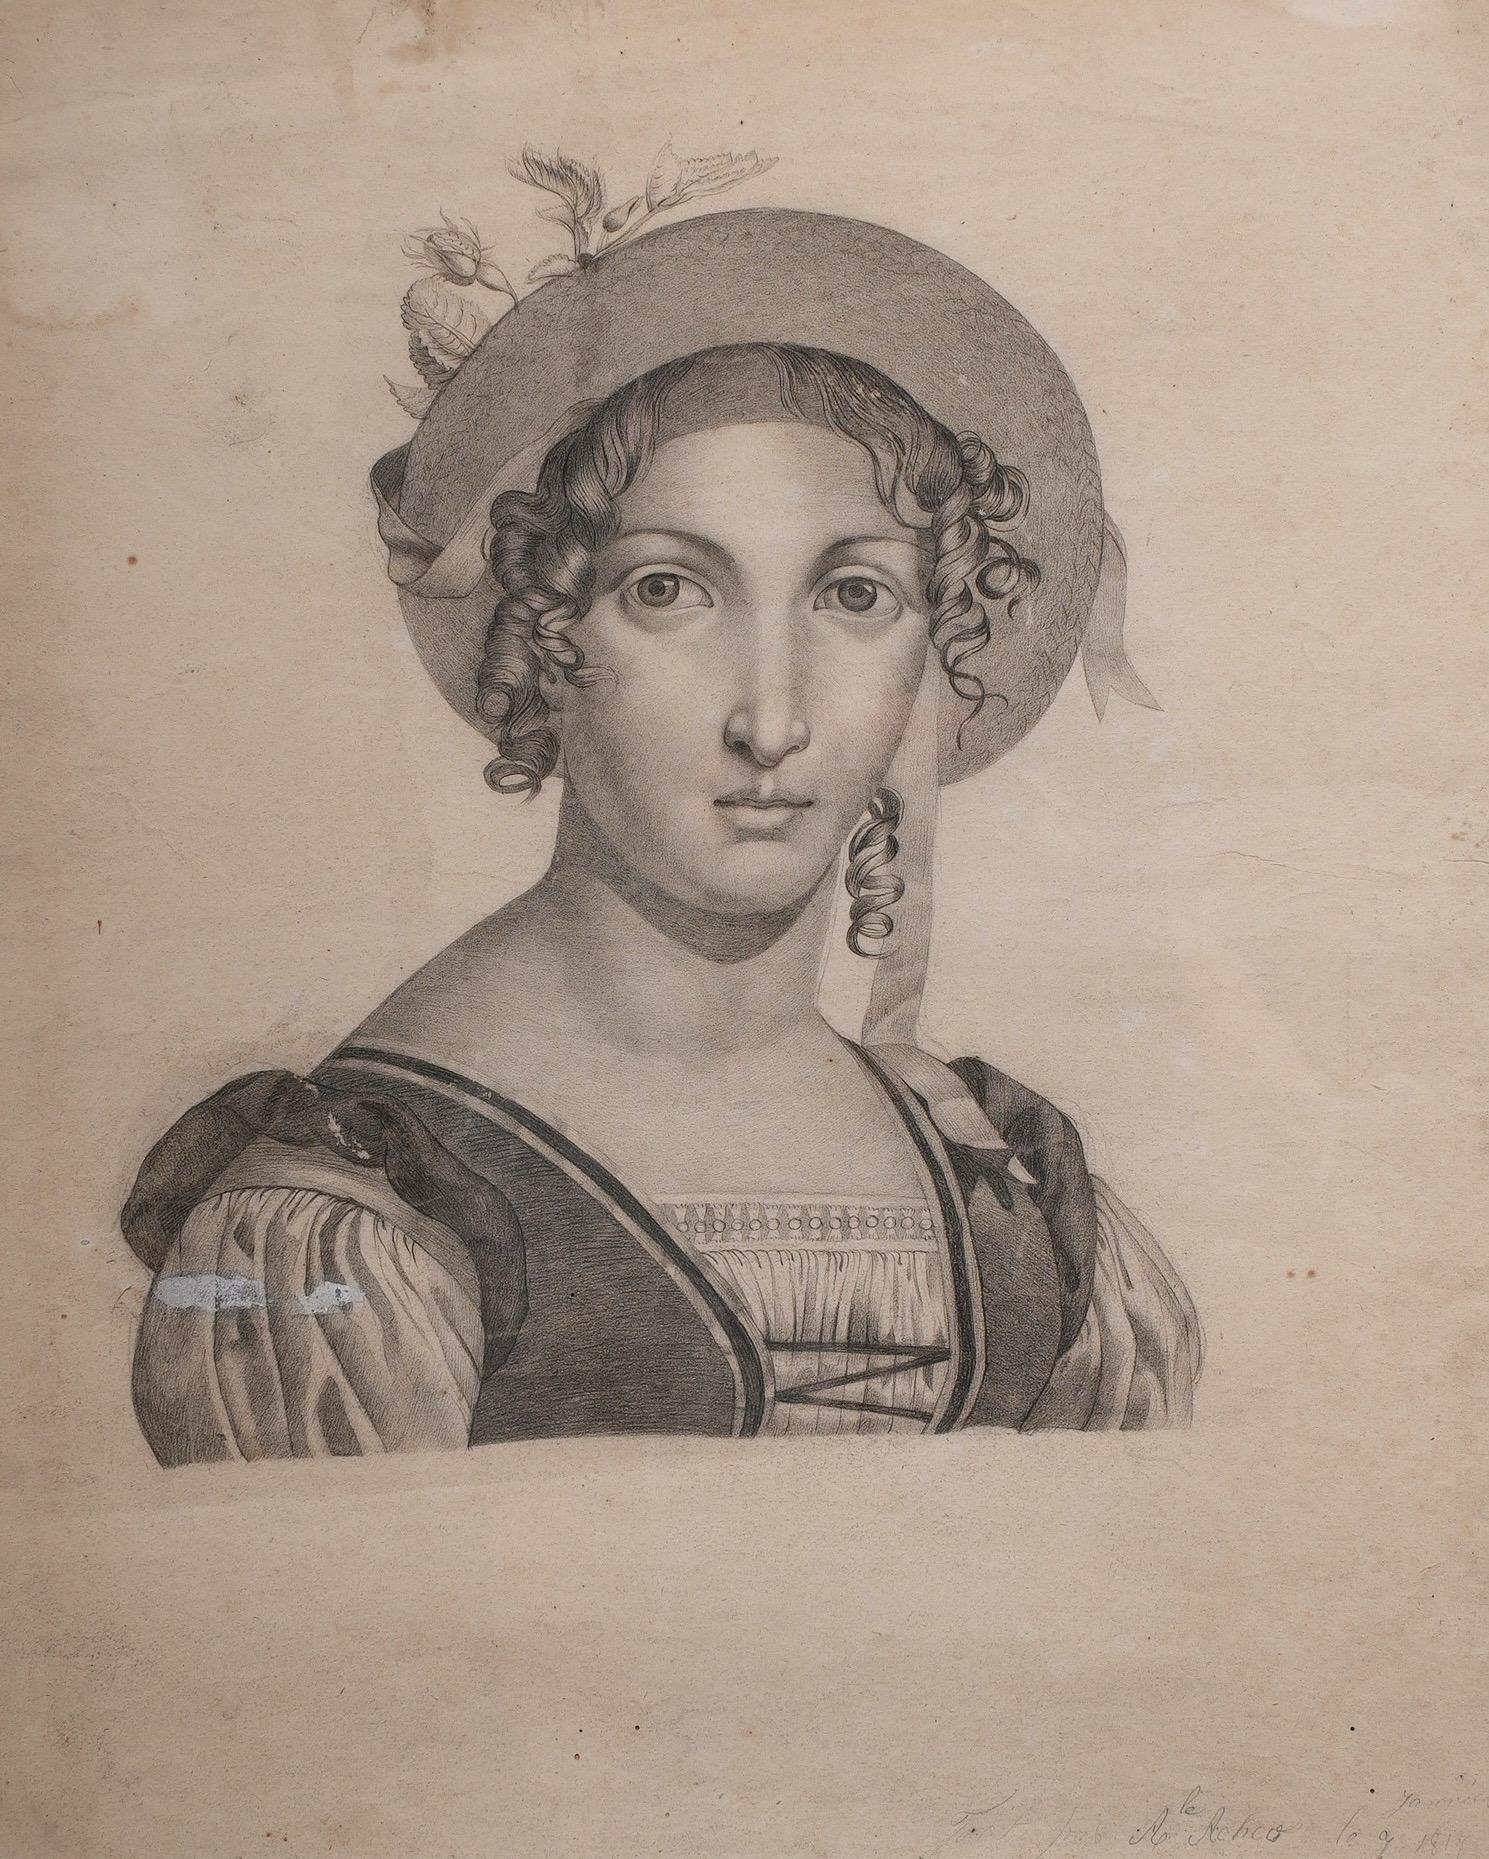 Drawing of a French woman, signed and dated “1817.” The woman wears a “troubadour” ensemble that could reflect either her *région d'origine* or point to the Romantic, new-medieval vogue of the post-Napoleonic period. She’s framed in a modern rustic